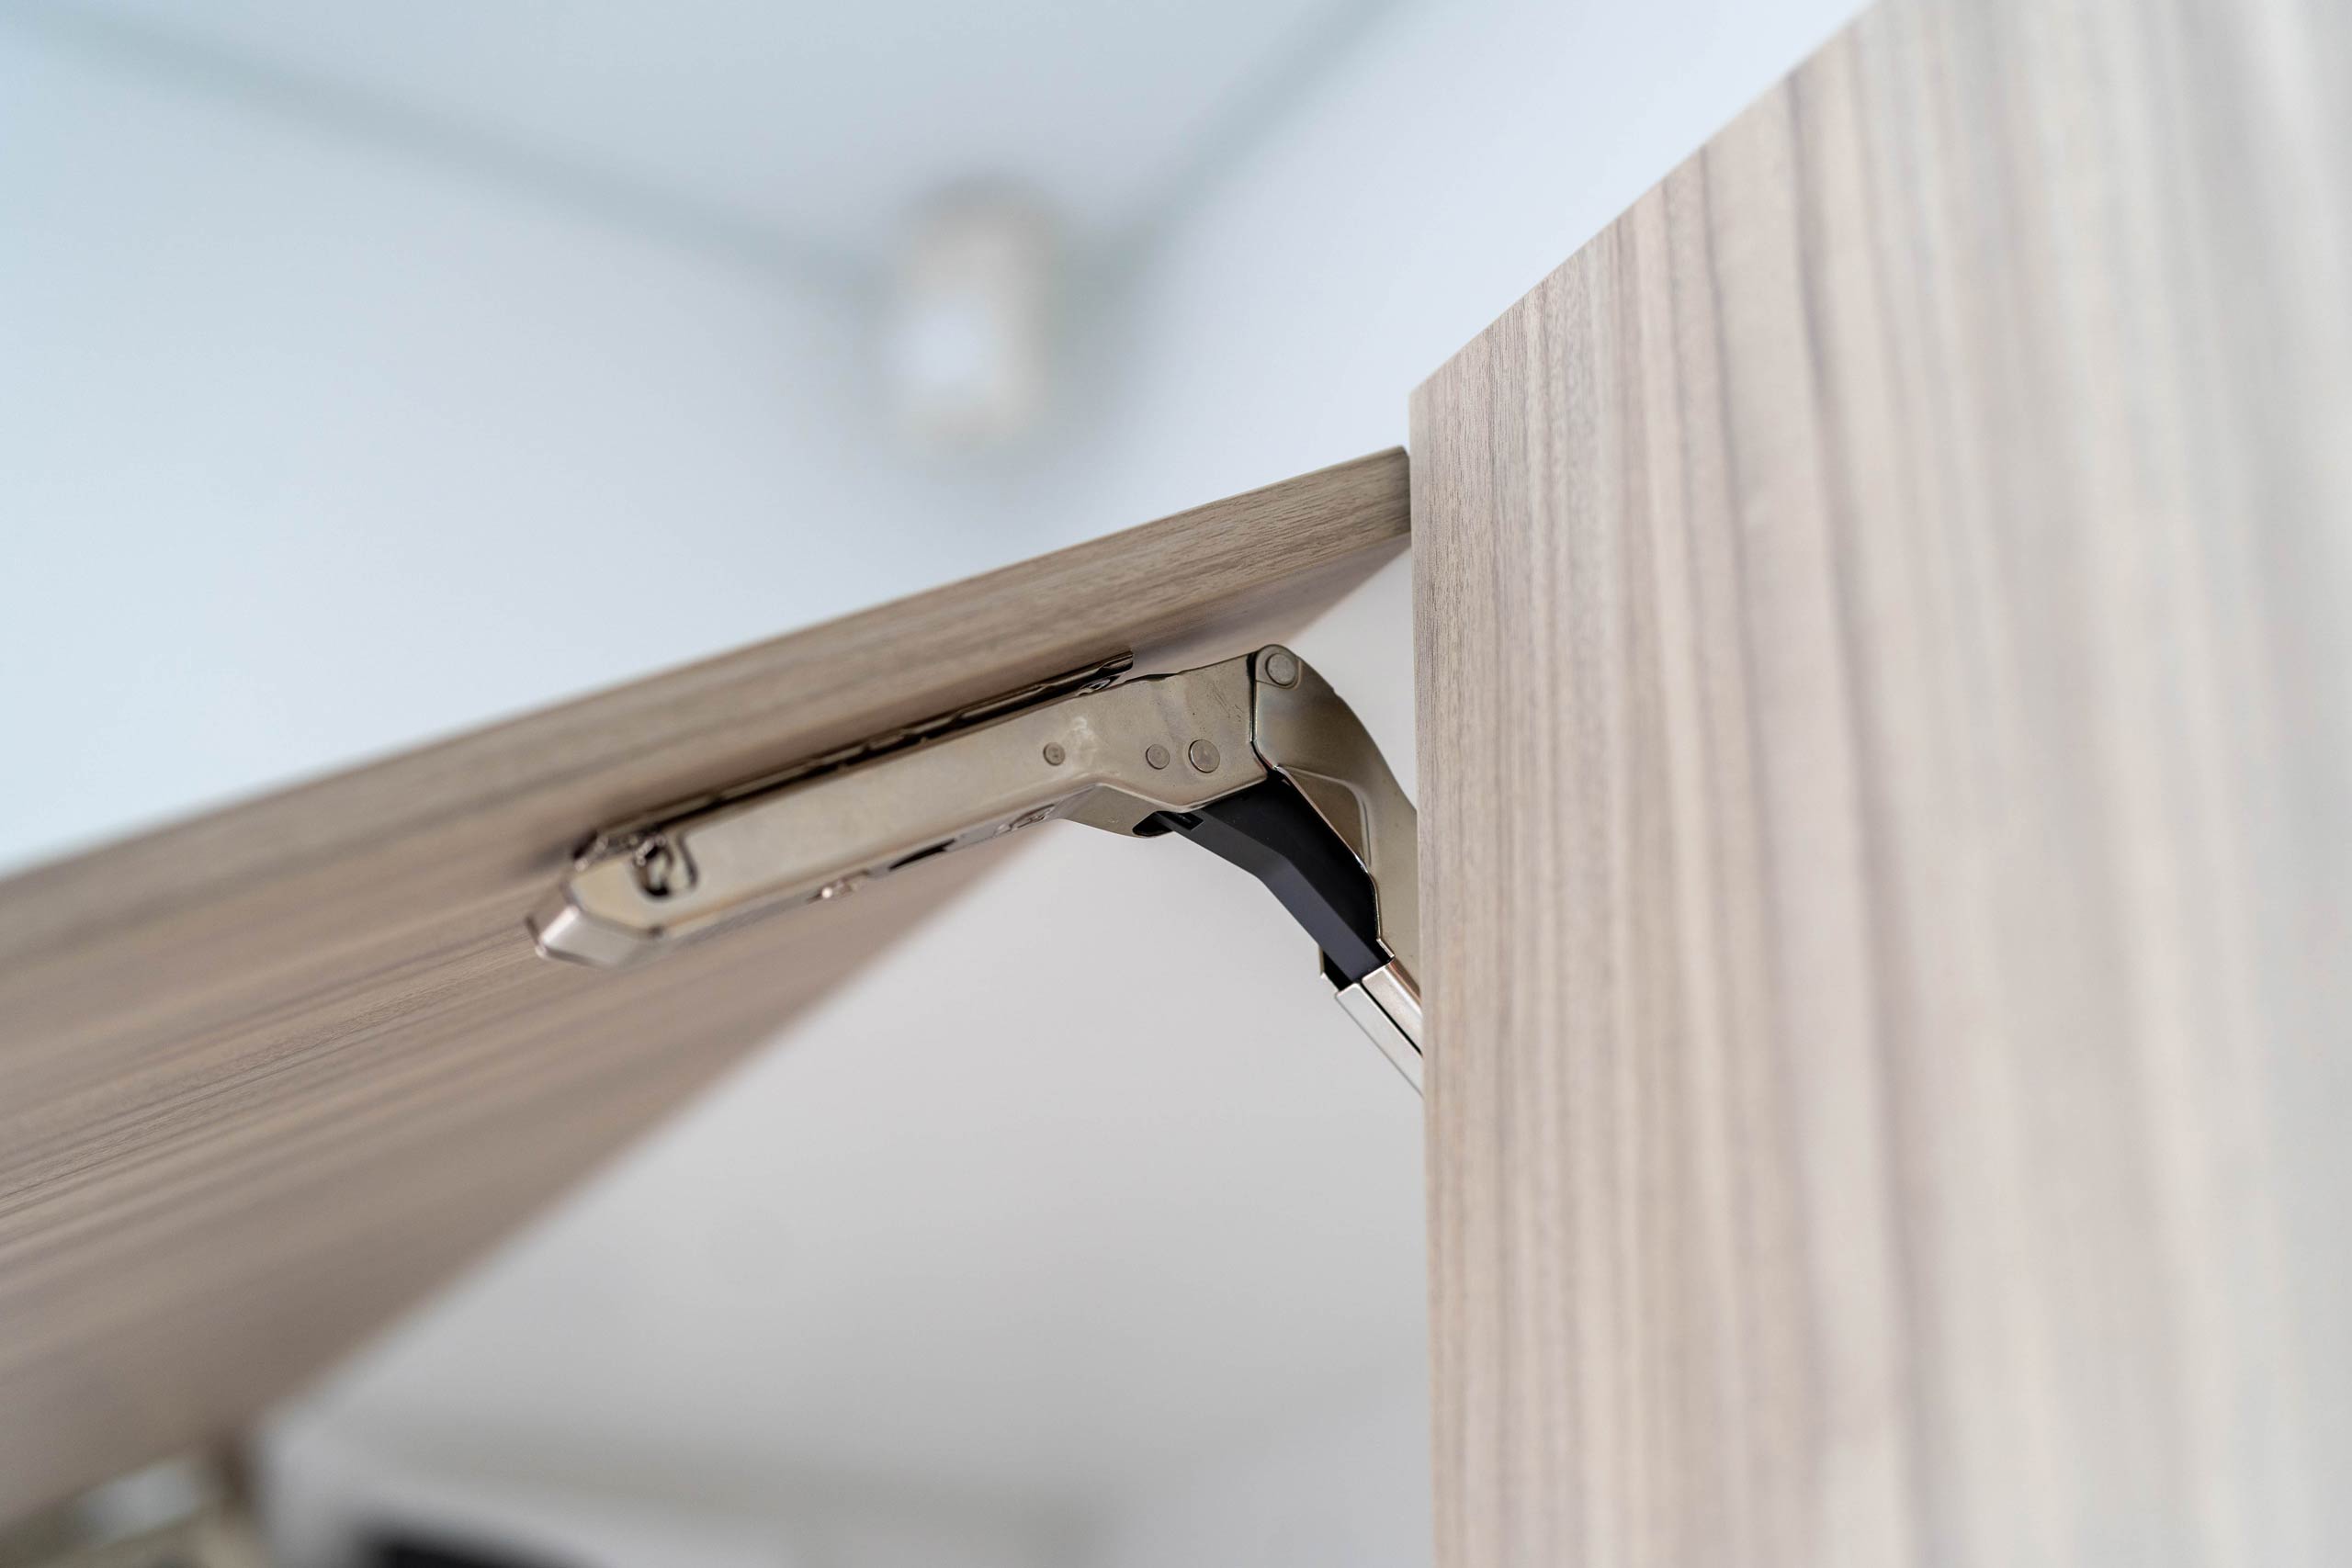 Photograph showing our blum hardware